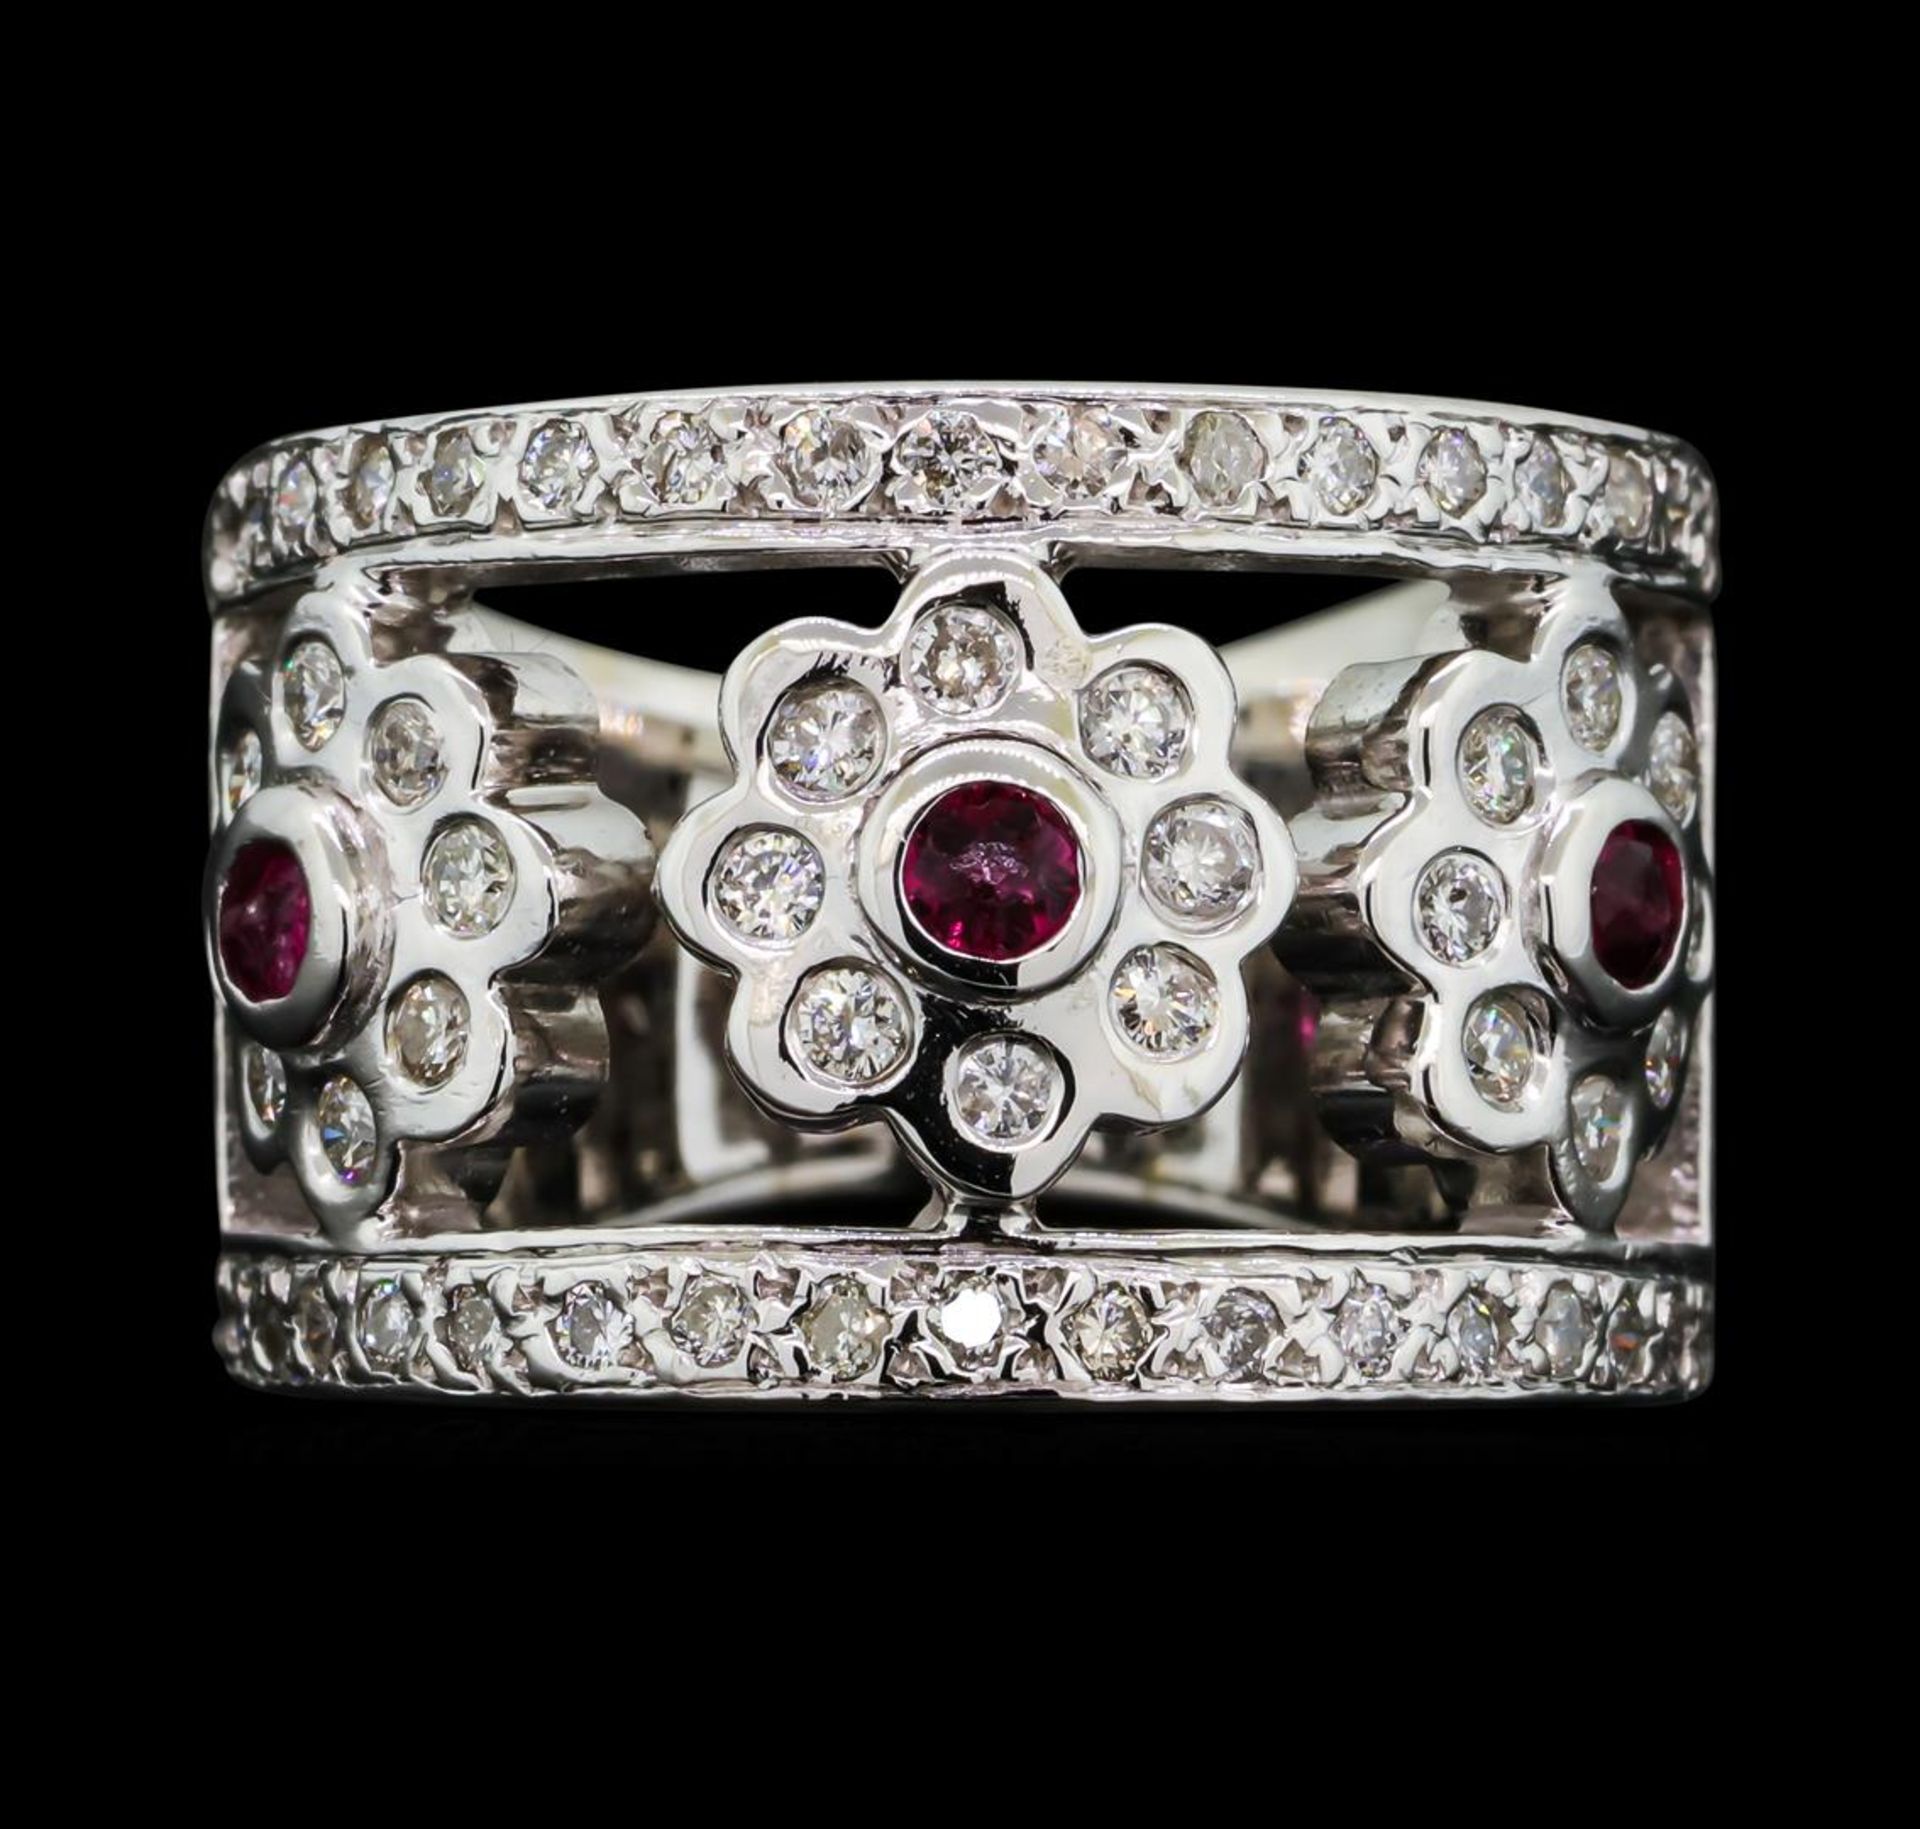 0.95 ctw Diamond and Ruby Band - 14KT White Gold - Image 2 of 5